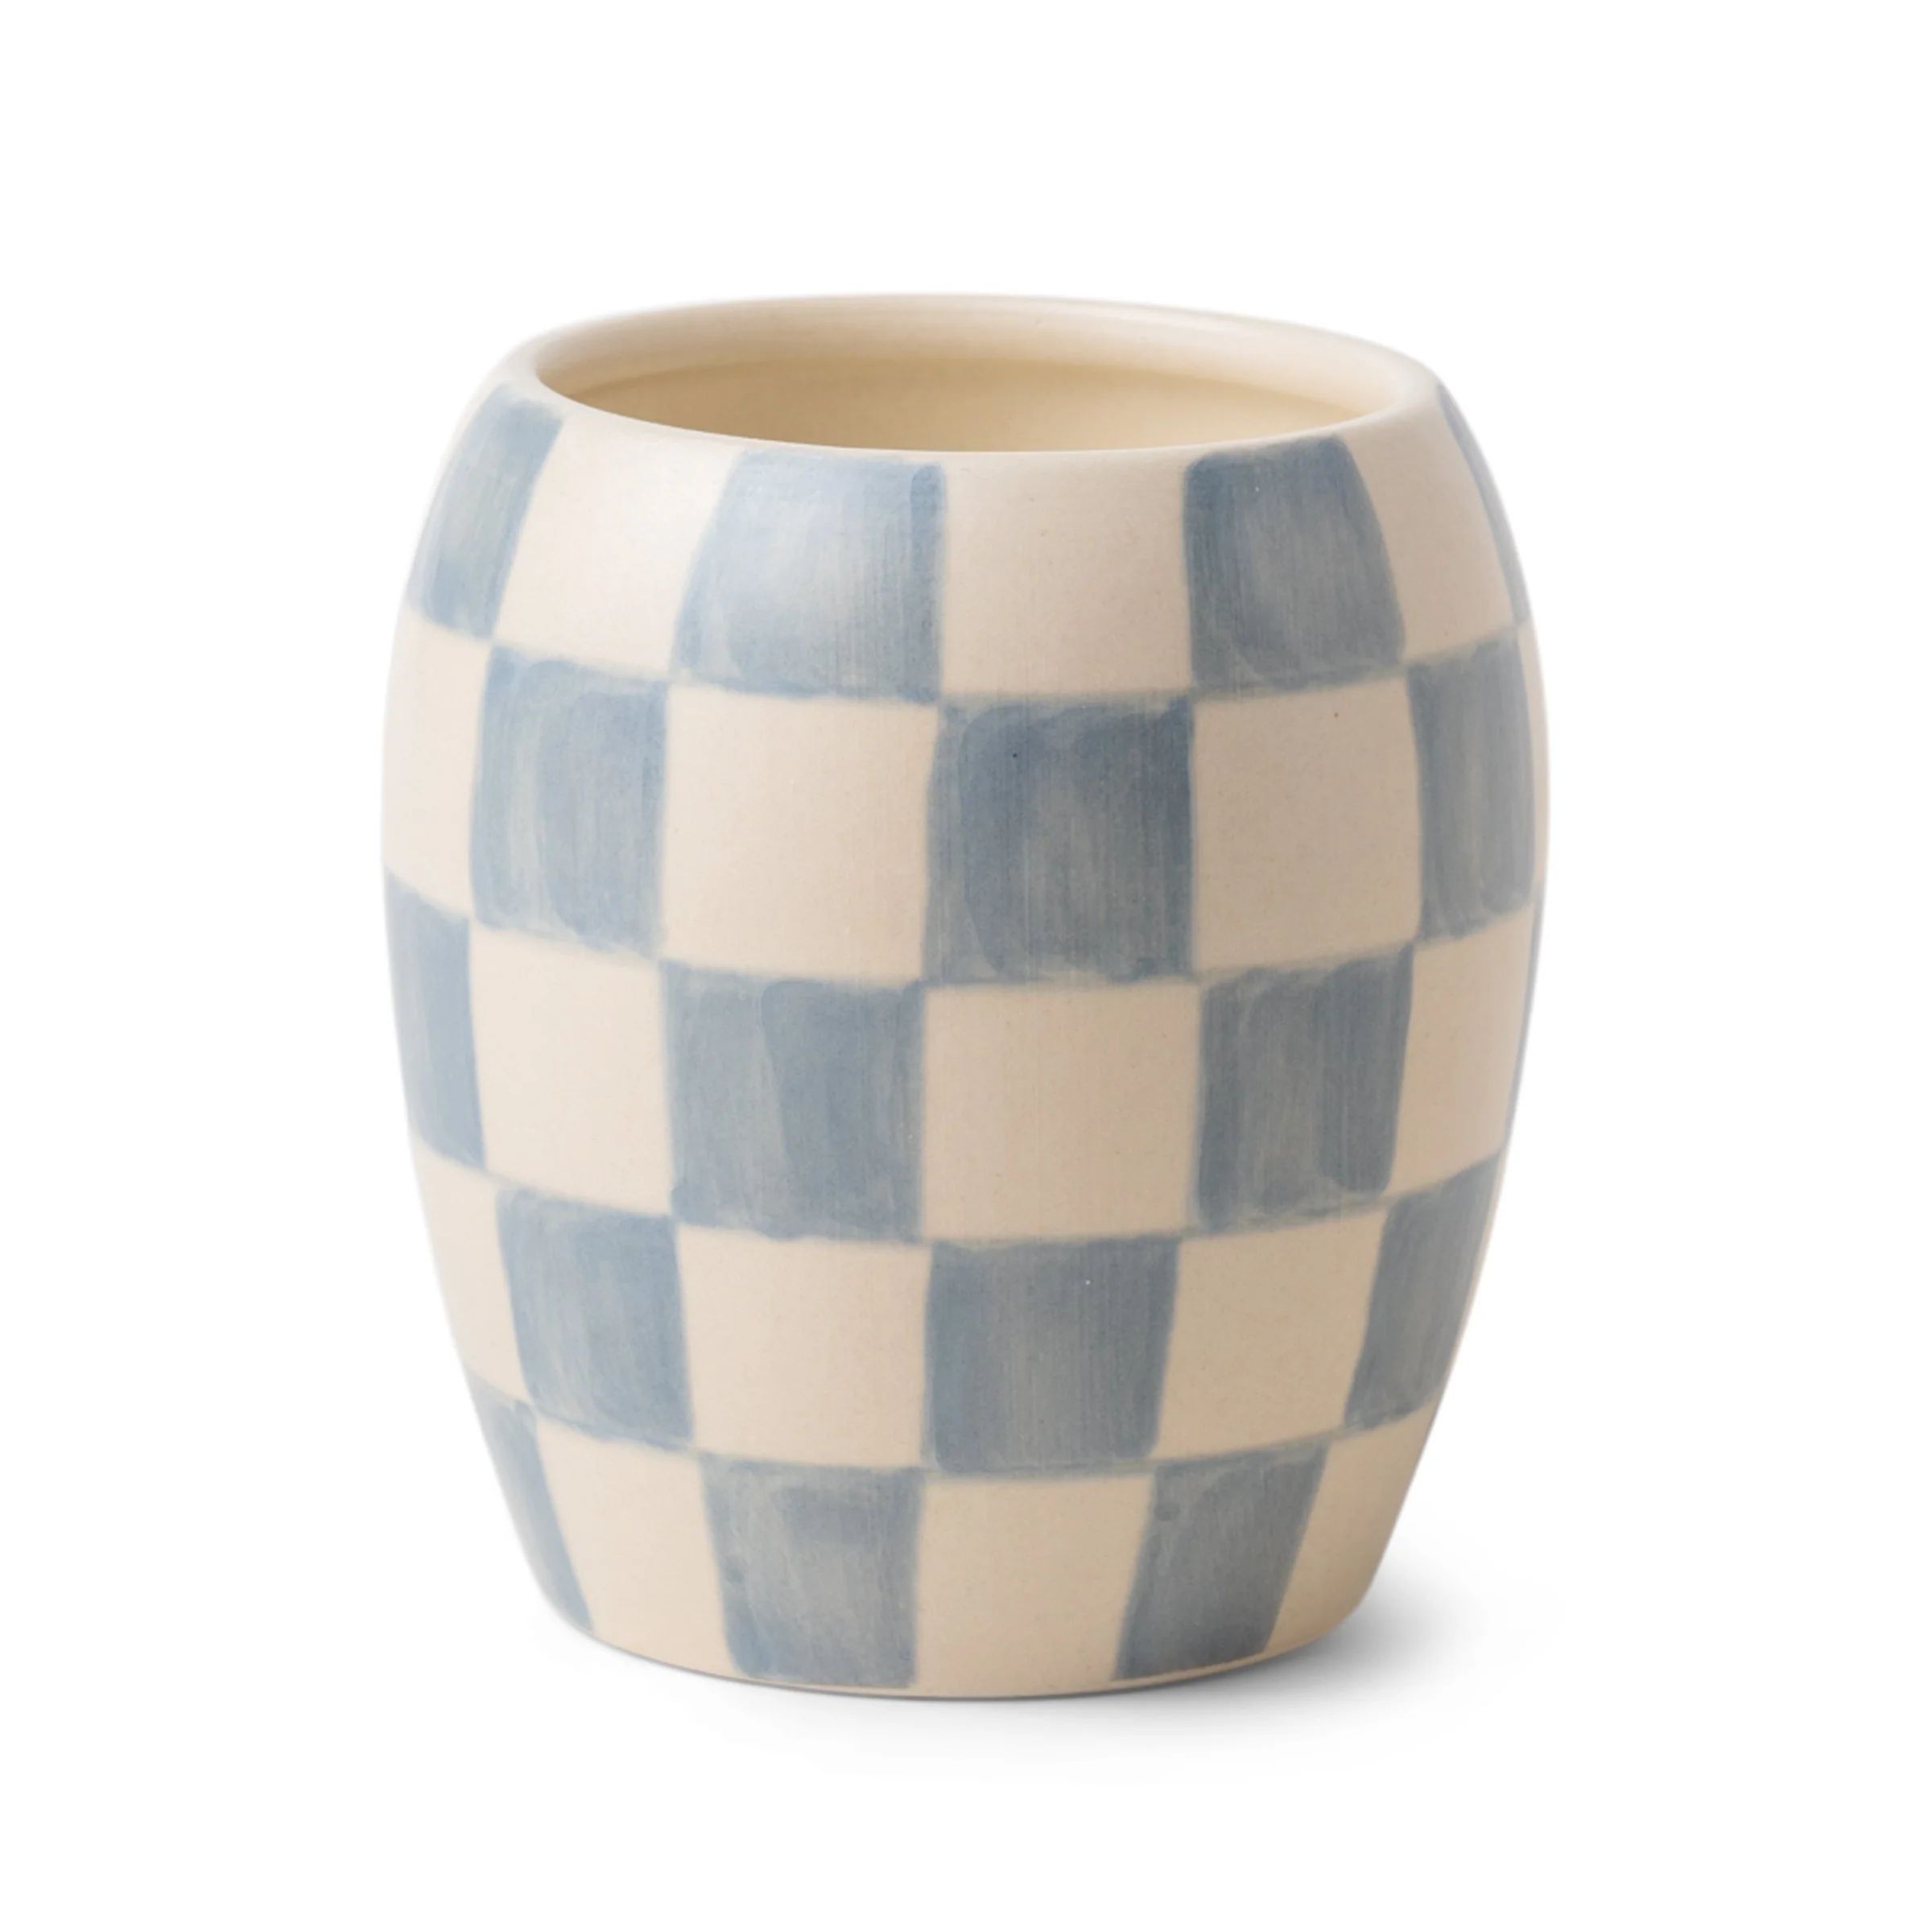 Checkmate 11 oz Candle - Cotton + Teak | Paddywax